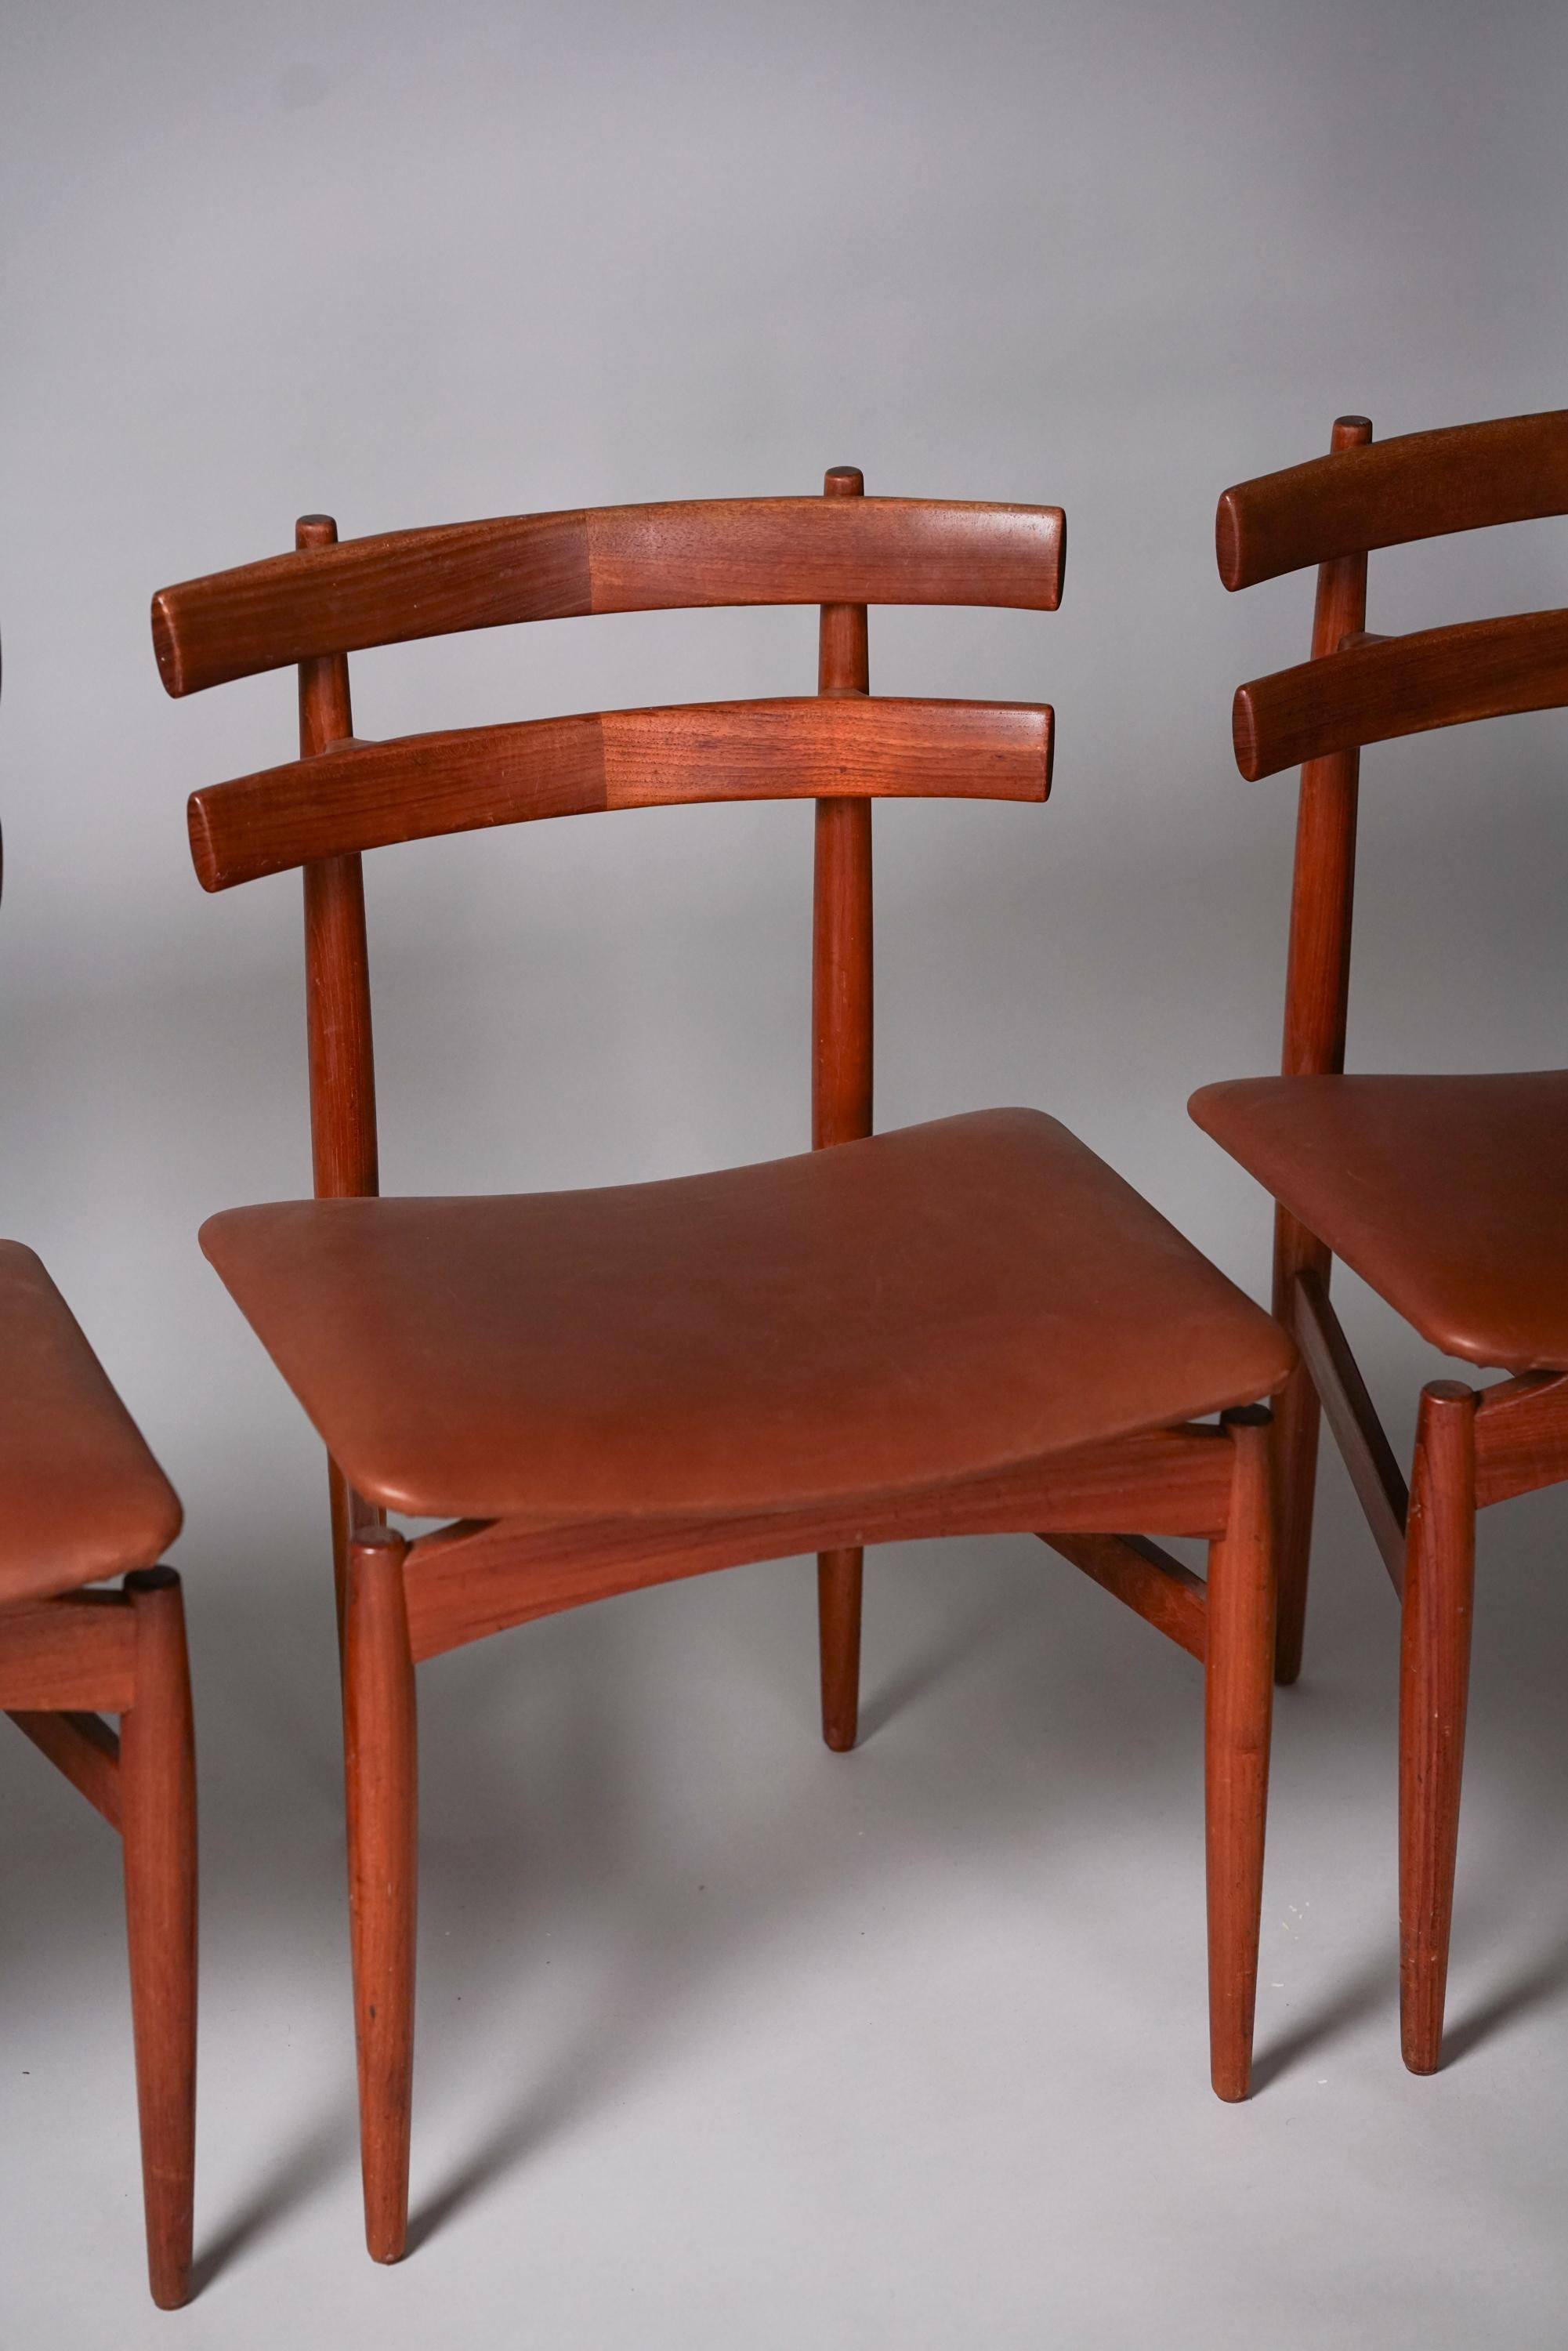 Mid-20th Century Set of Four Teak Chairs, Poul Hundevad, 1960s For Sale